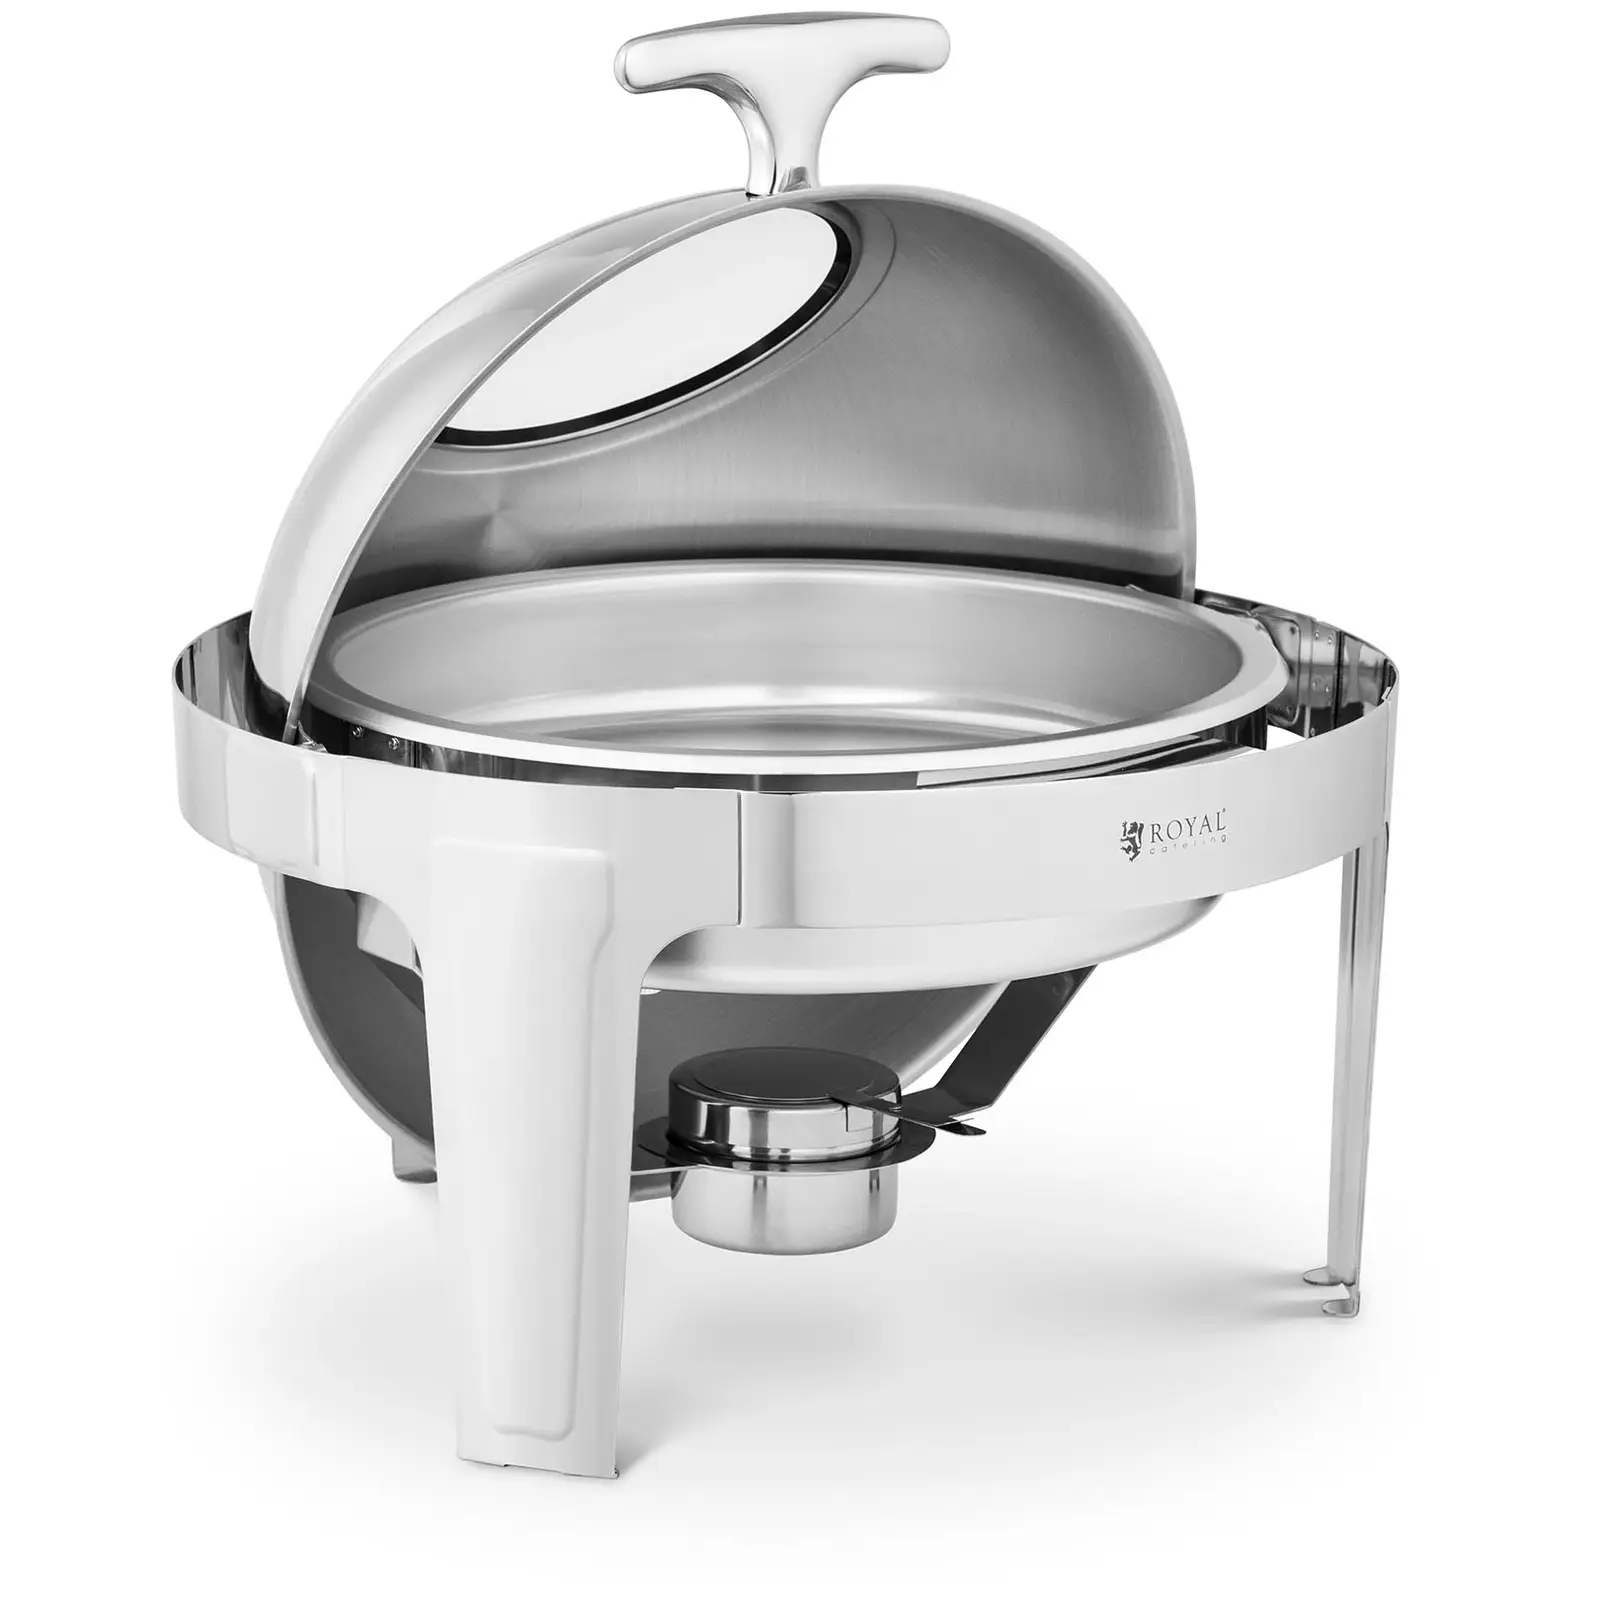 Chafing Dish - round with window - Royal Catering - 5.8 L